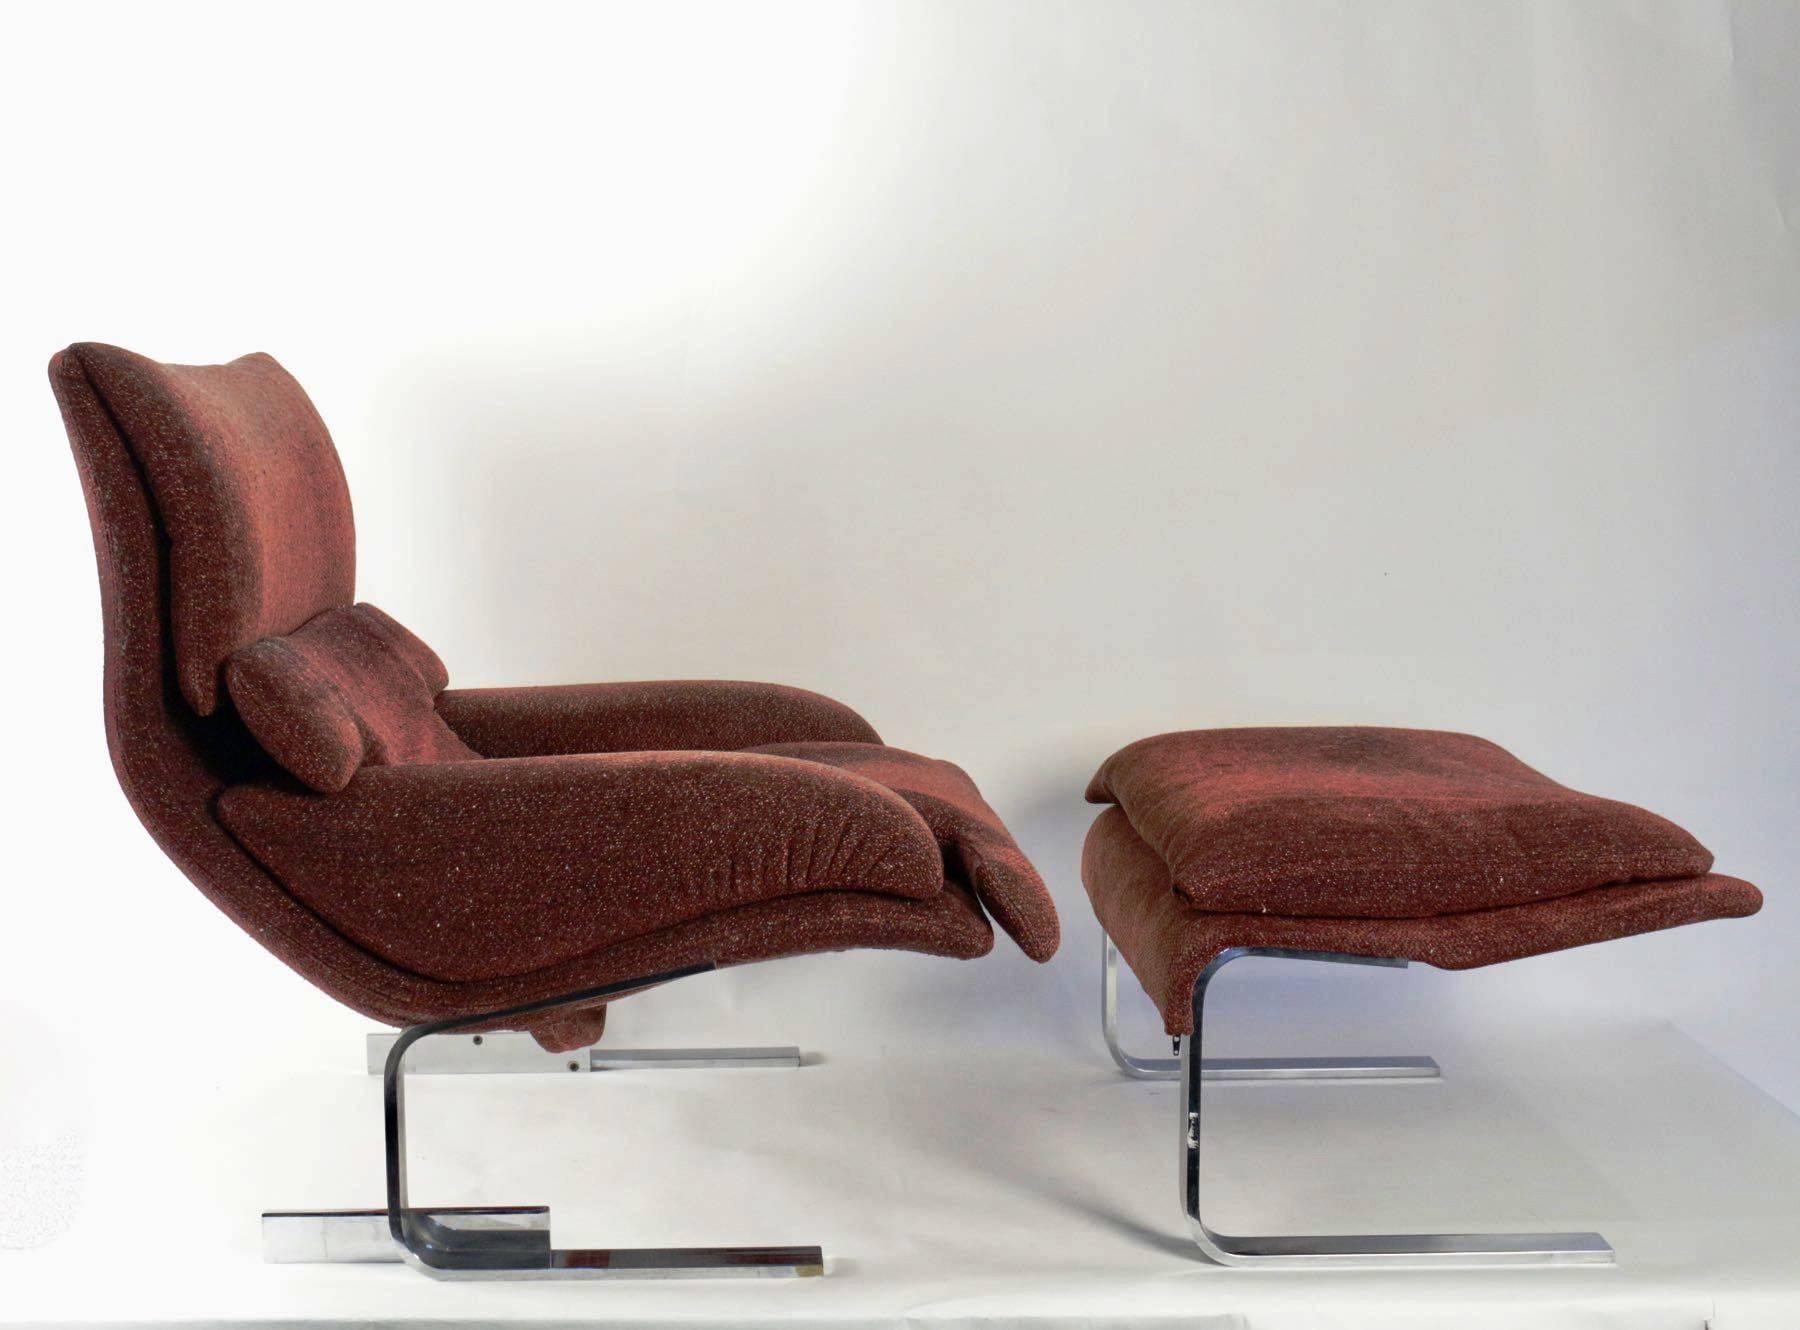 Fantastic and rare pair of "Onda" lounge armchairs with matching footstools - ottomans by Giovanni Offredi, edited by Saporiti Italia, late 1970s.
Chromed Legs and original burgundy wool velvet fabric, possibly by Missoni.
Fabric is